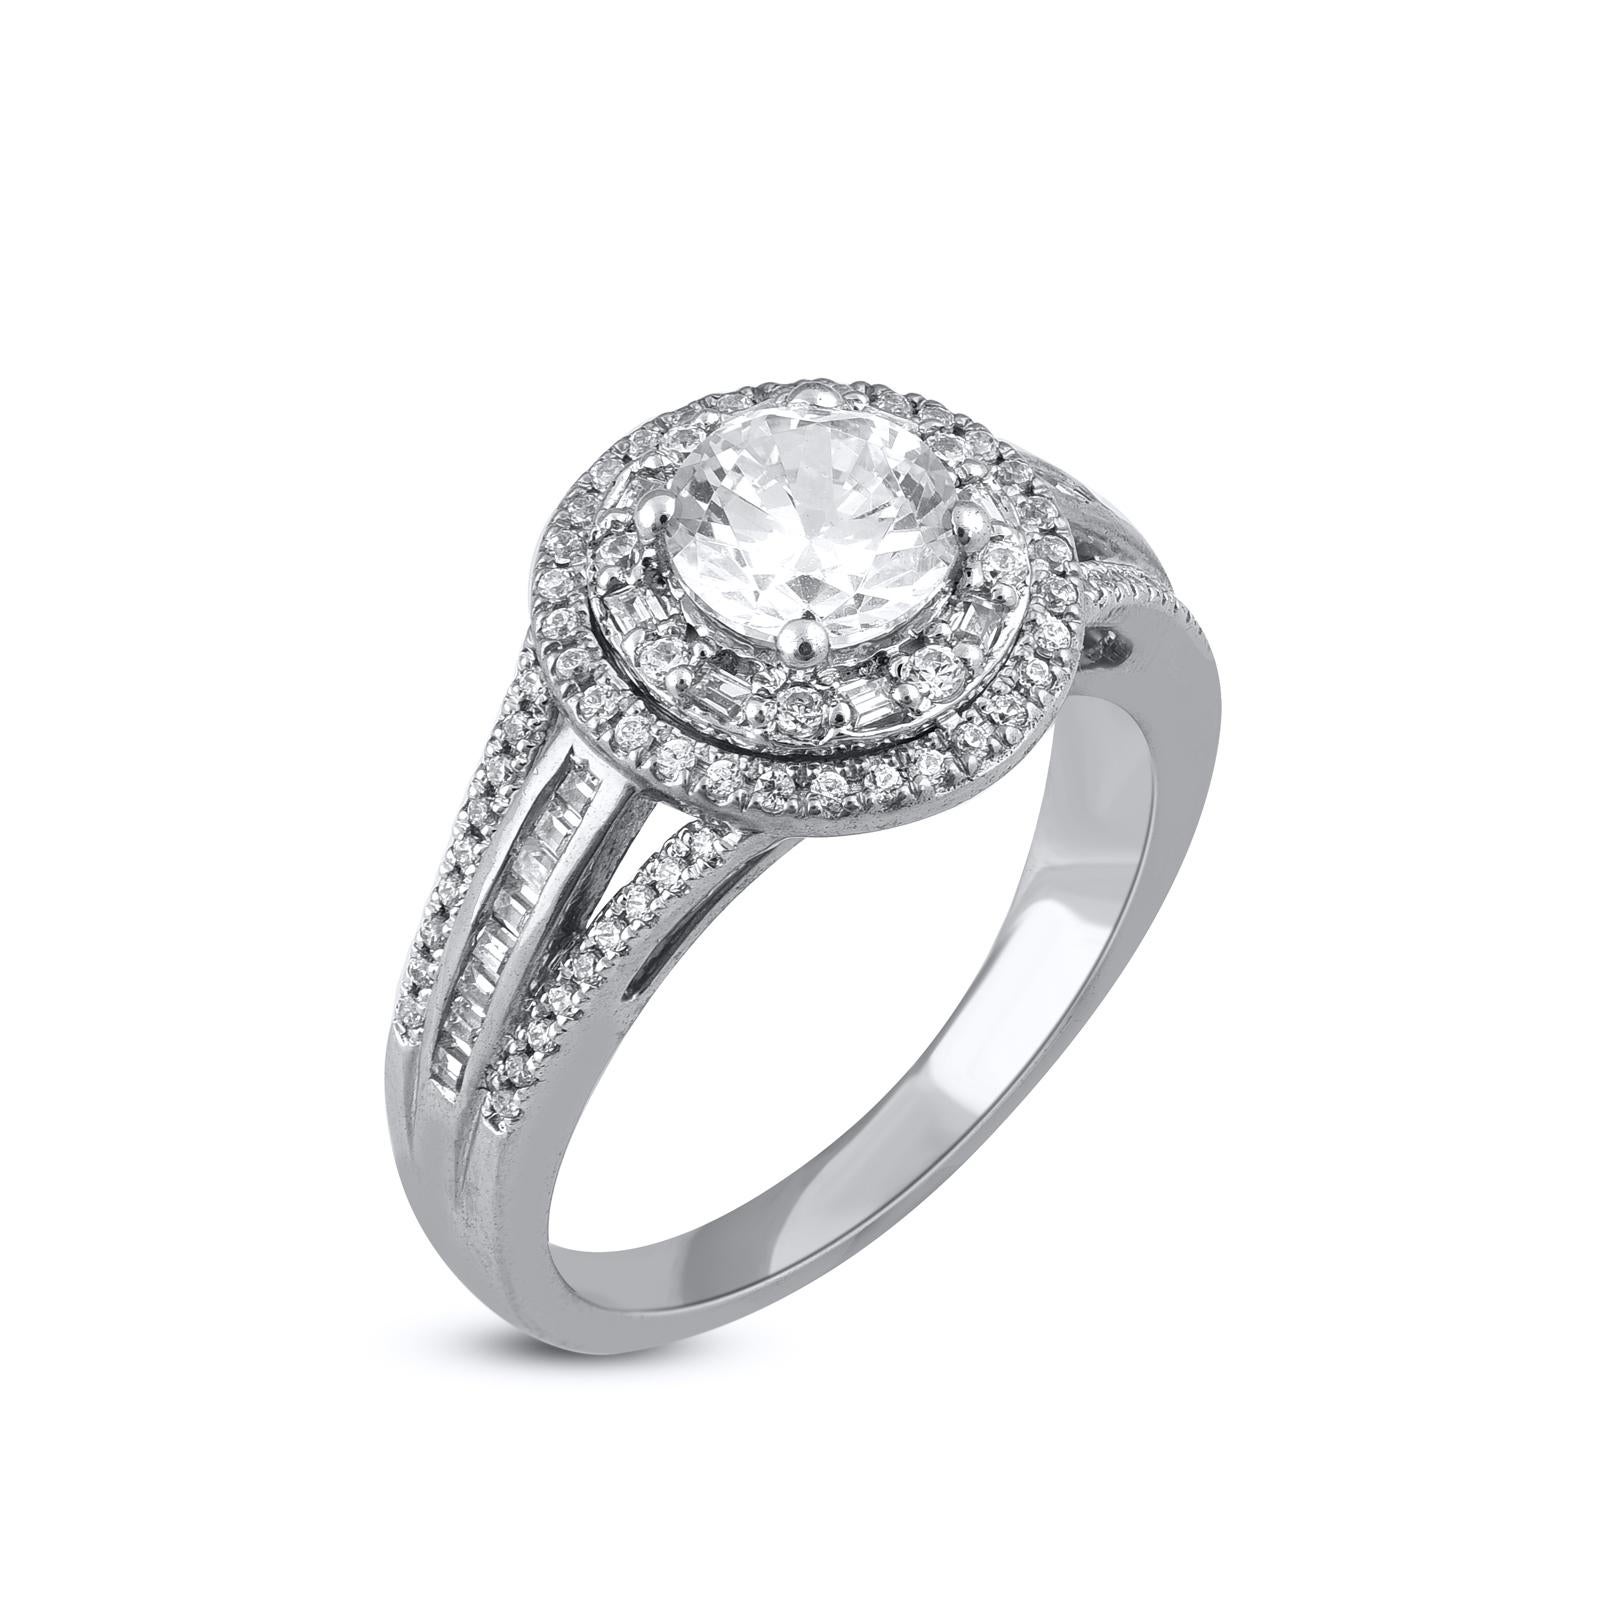 This immaculate double halo engagement ring combines sparkling style with delicate femininity from the twisted split shank. The twists give the ring a ribbon-like effect that is ladylike and reminiscent of a bow this ring is expertly crafted in 18